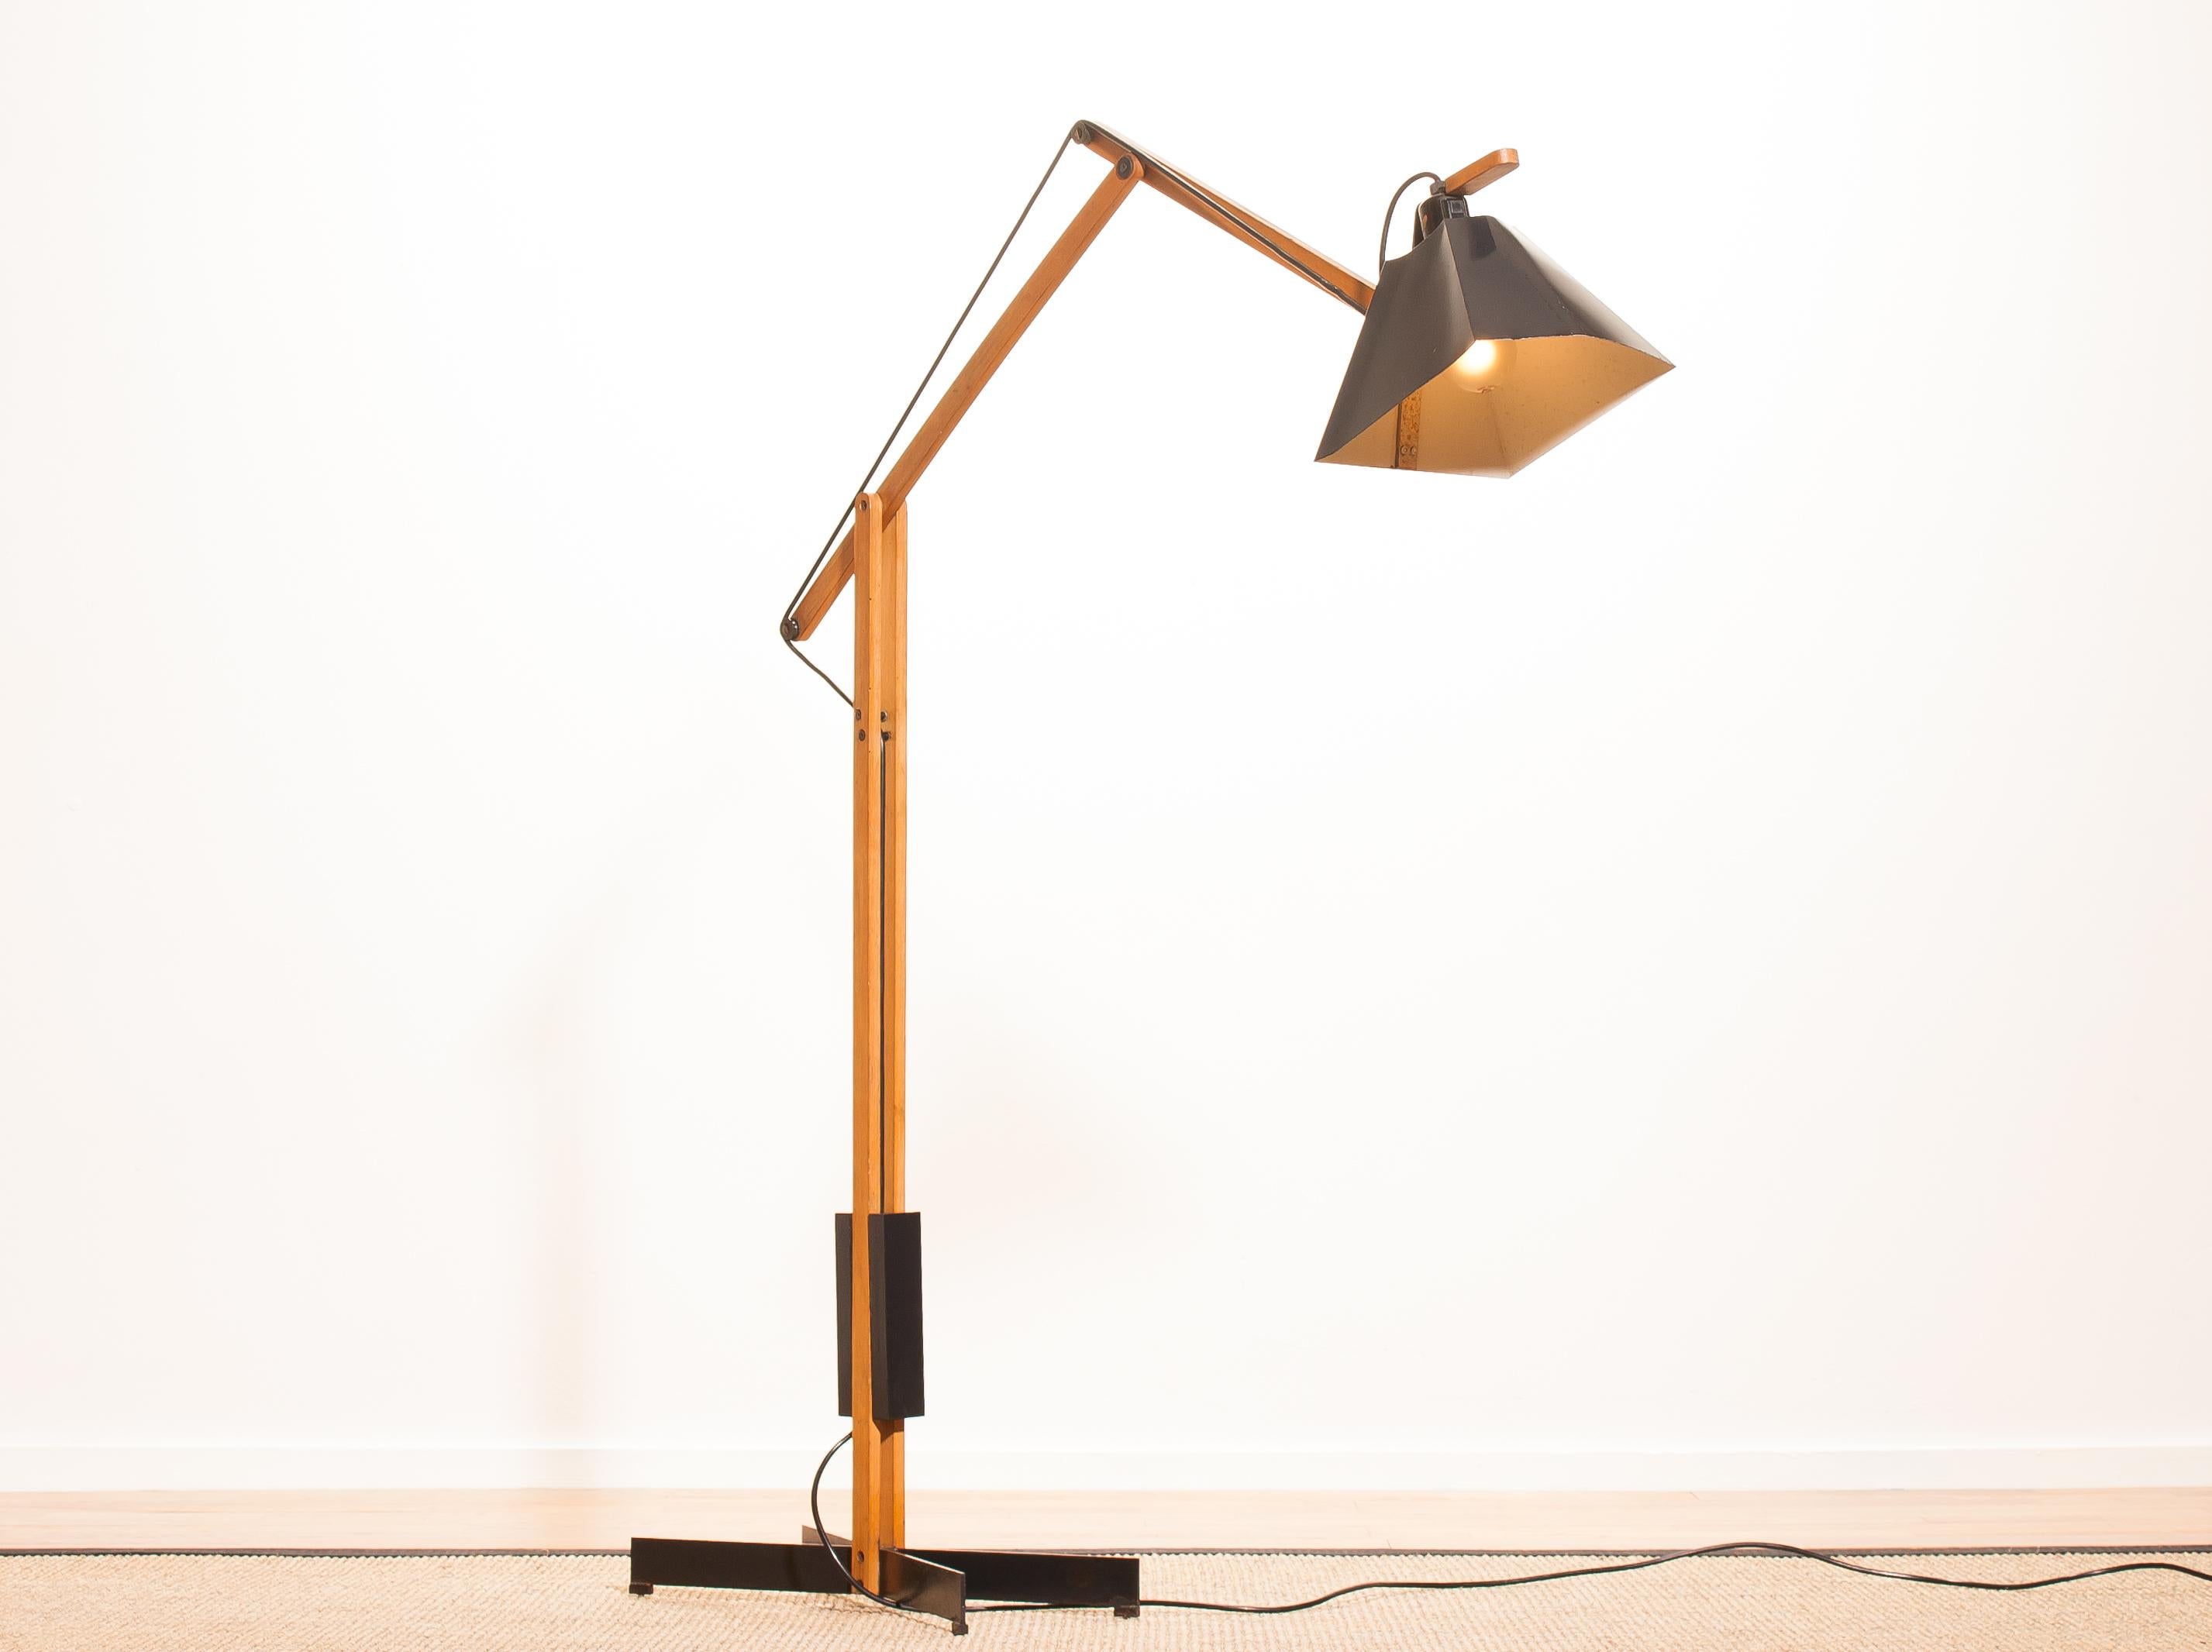 Magnificent rare floor lamp by Luxus, Sweden.
This lamp is adjustable by a counterbalance.
The stand is made of teak with a black lacquered shade.
It is labelled by Luxus and in a beautiful condition,
circa 1950s.
Dimensions: H 125 cm, D 90 cm,